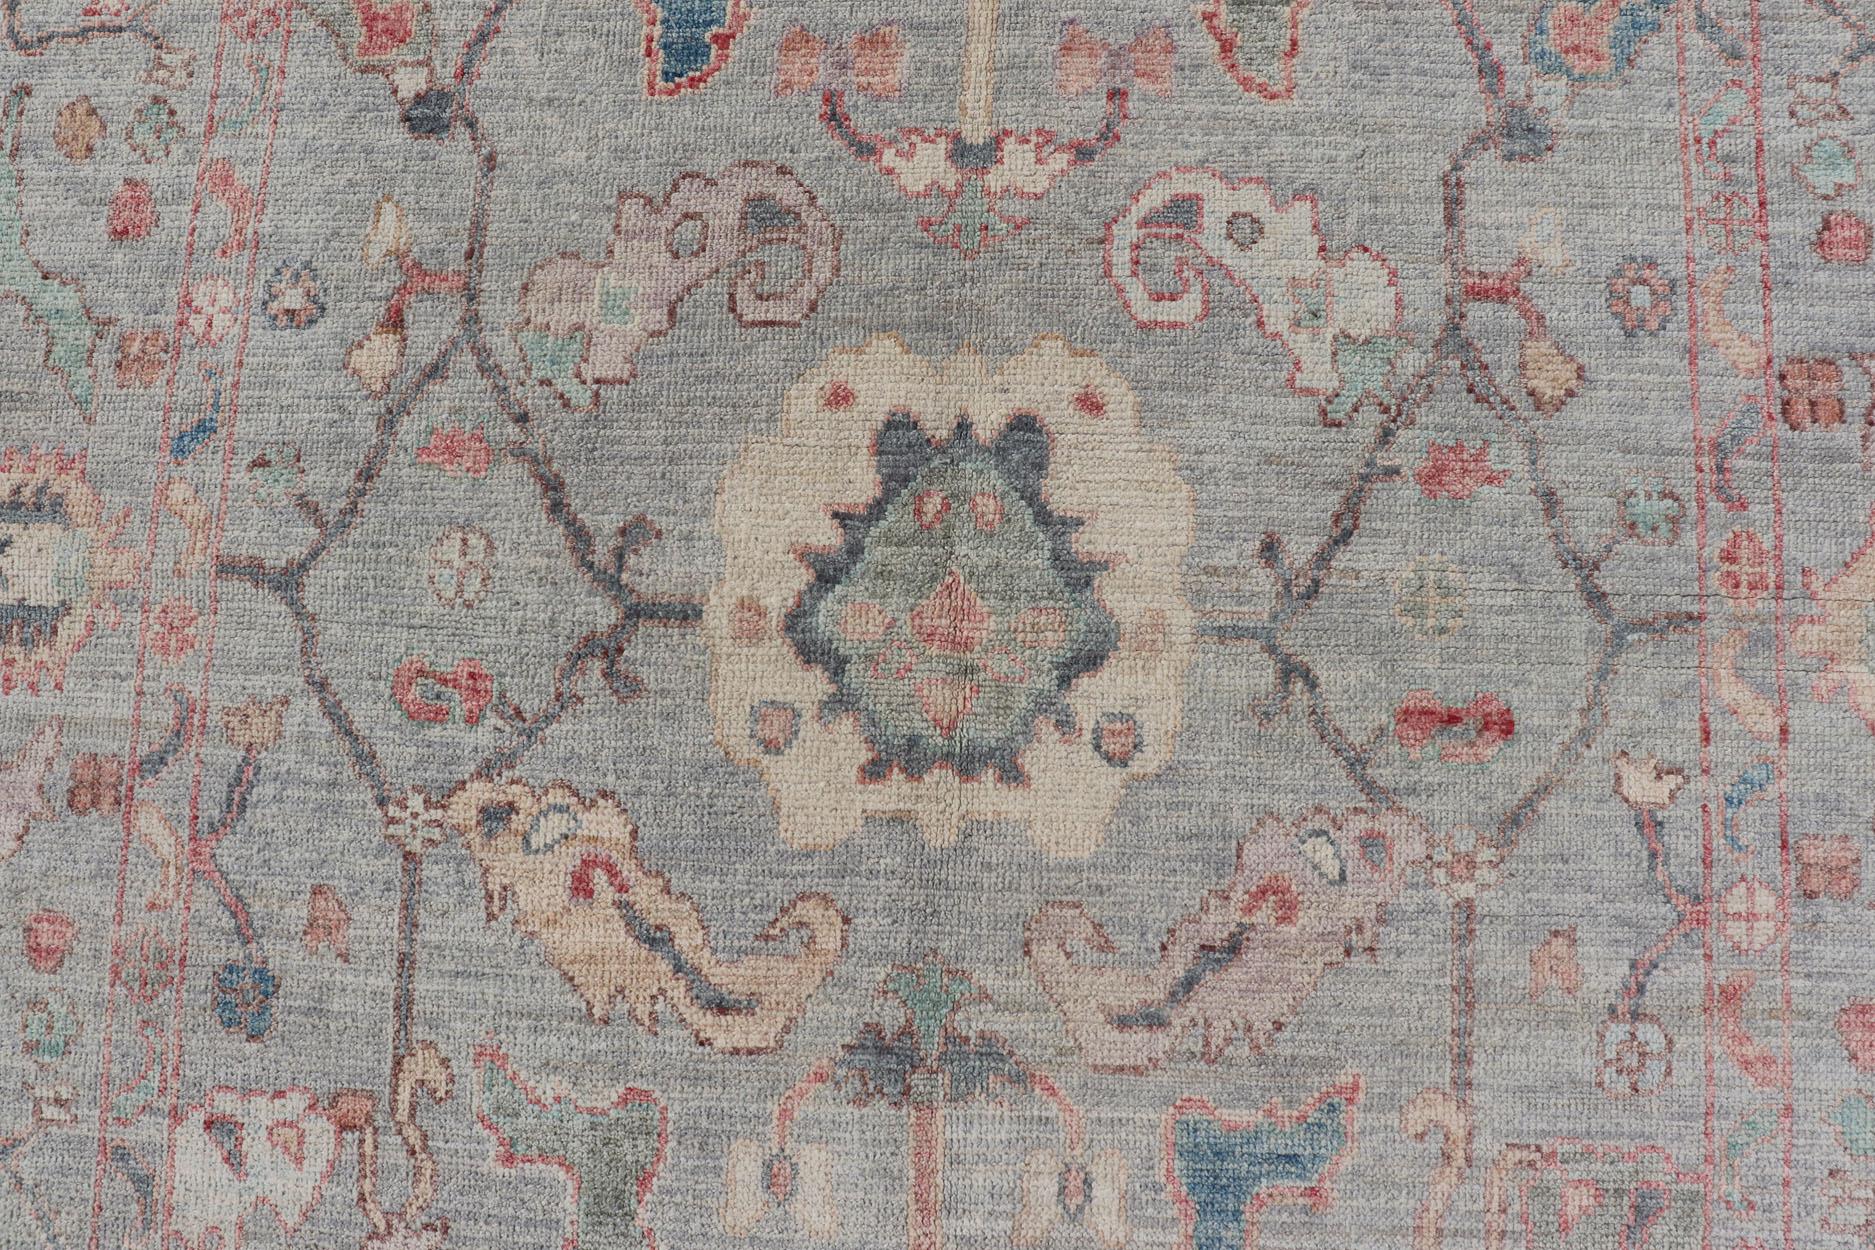 Modern All-over floral oushak with a light blue-gray background and multi-colors. Keivan Woven Arts; rug AWR-5109 Country of origin: Afghanistan Type: Oushak Design: Floral, All-Over, Abstract Floral

Measures: 5'0 x 7'6

This modern floral